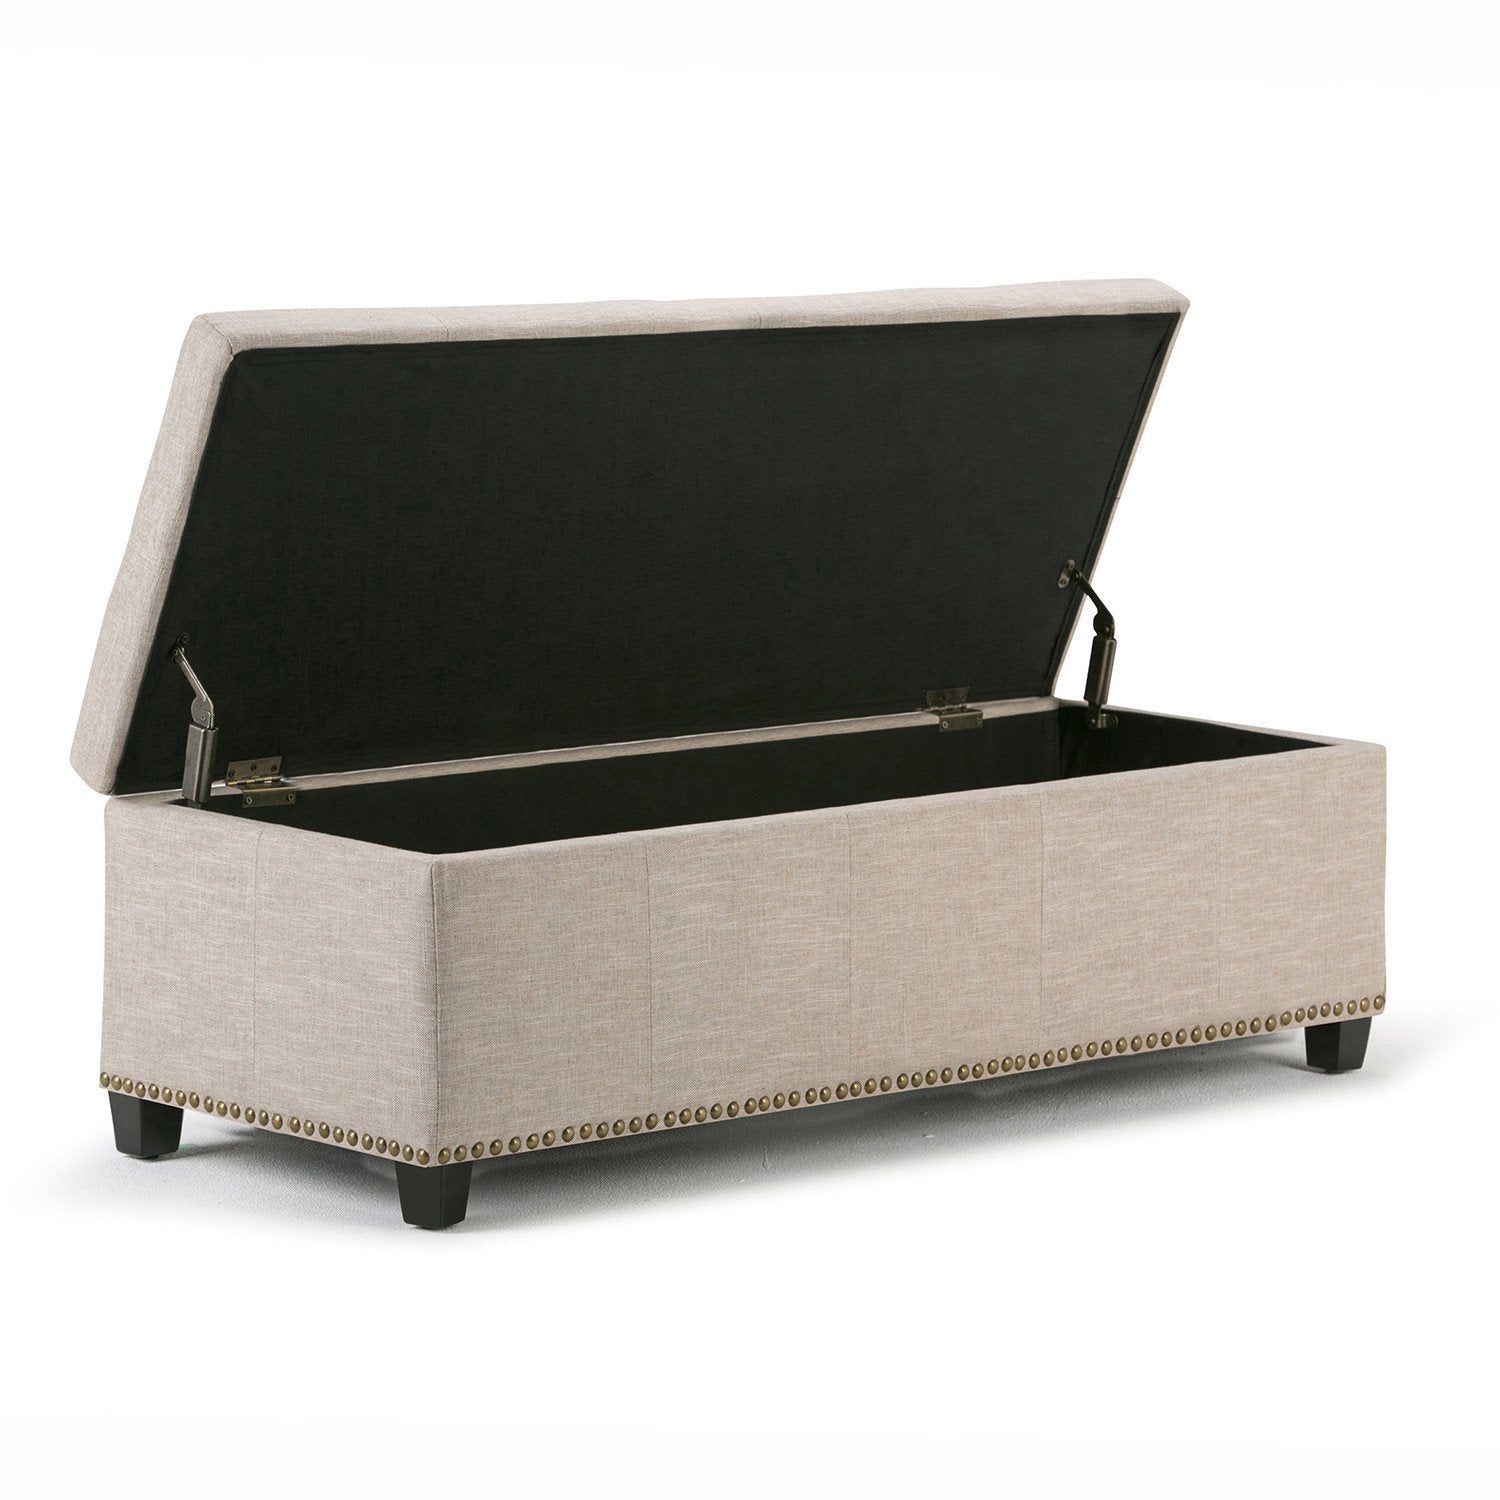 Natural Linen Style Fabric | Kingsley Linen Look Storage Ottoman